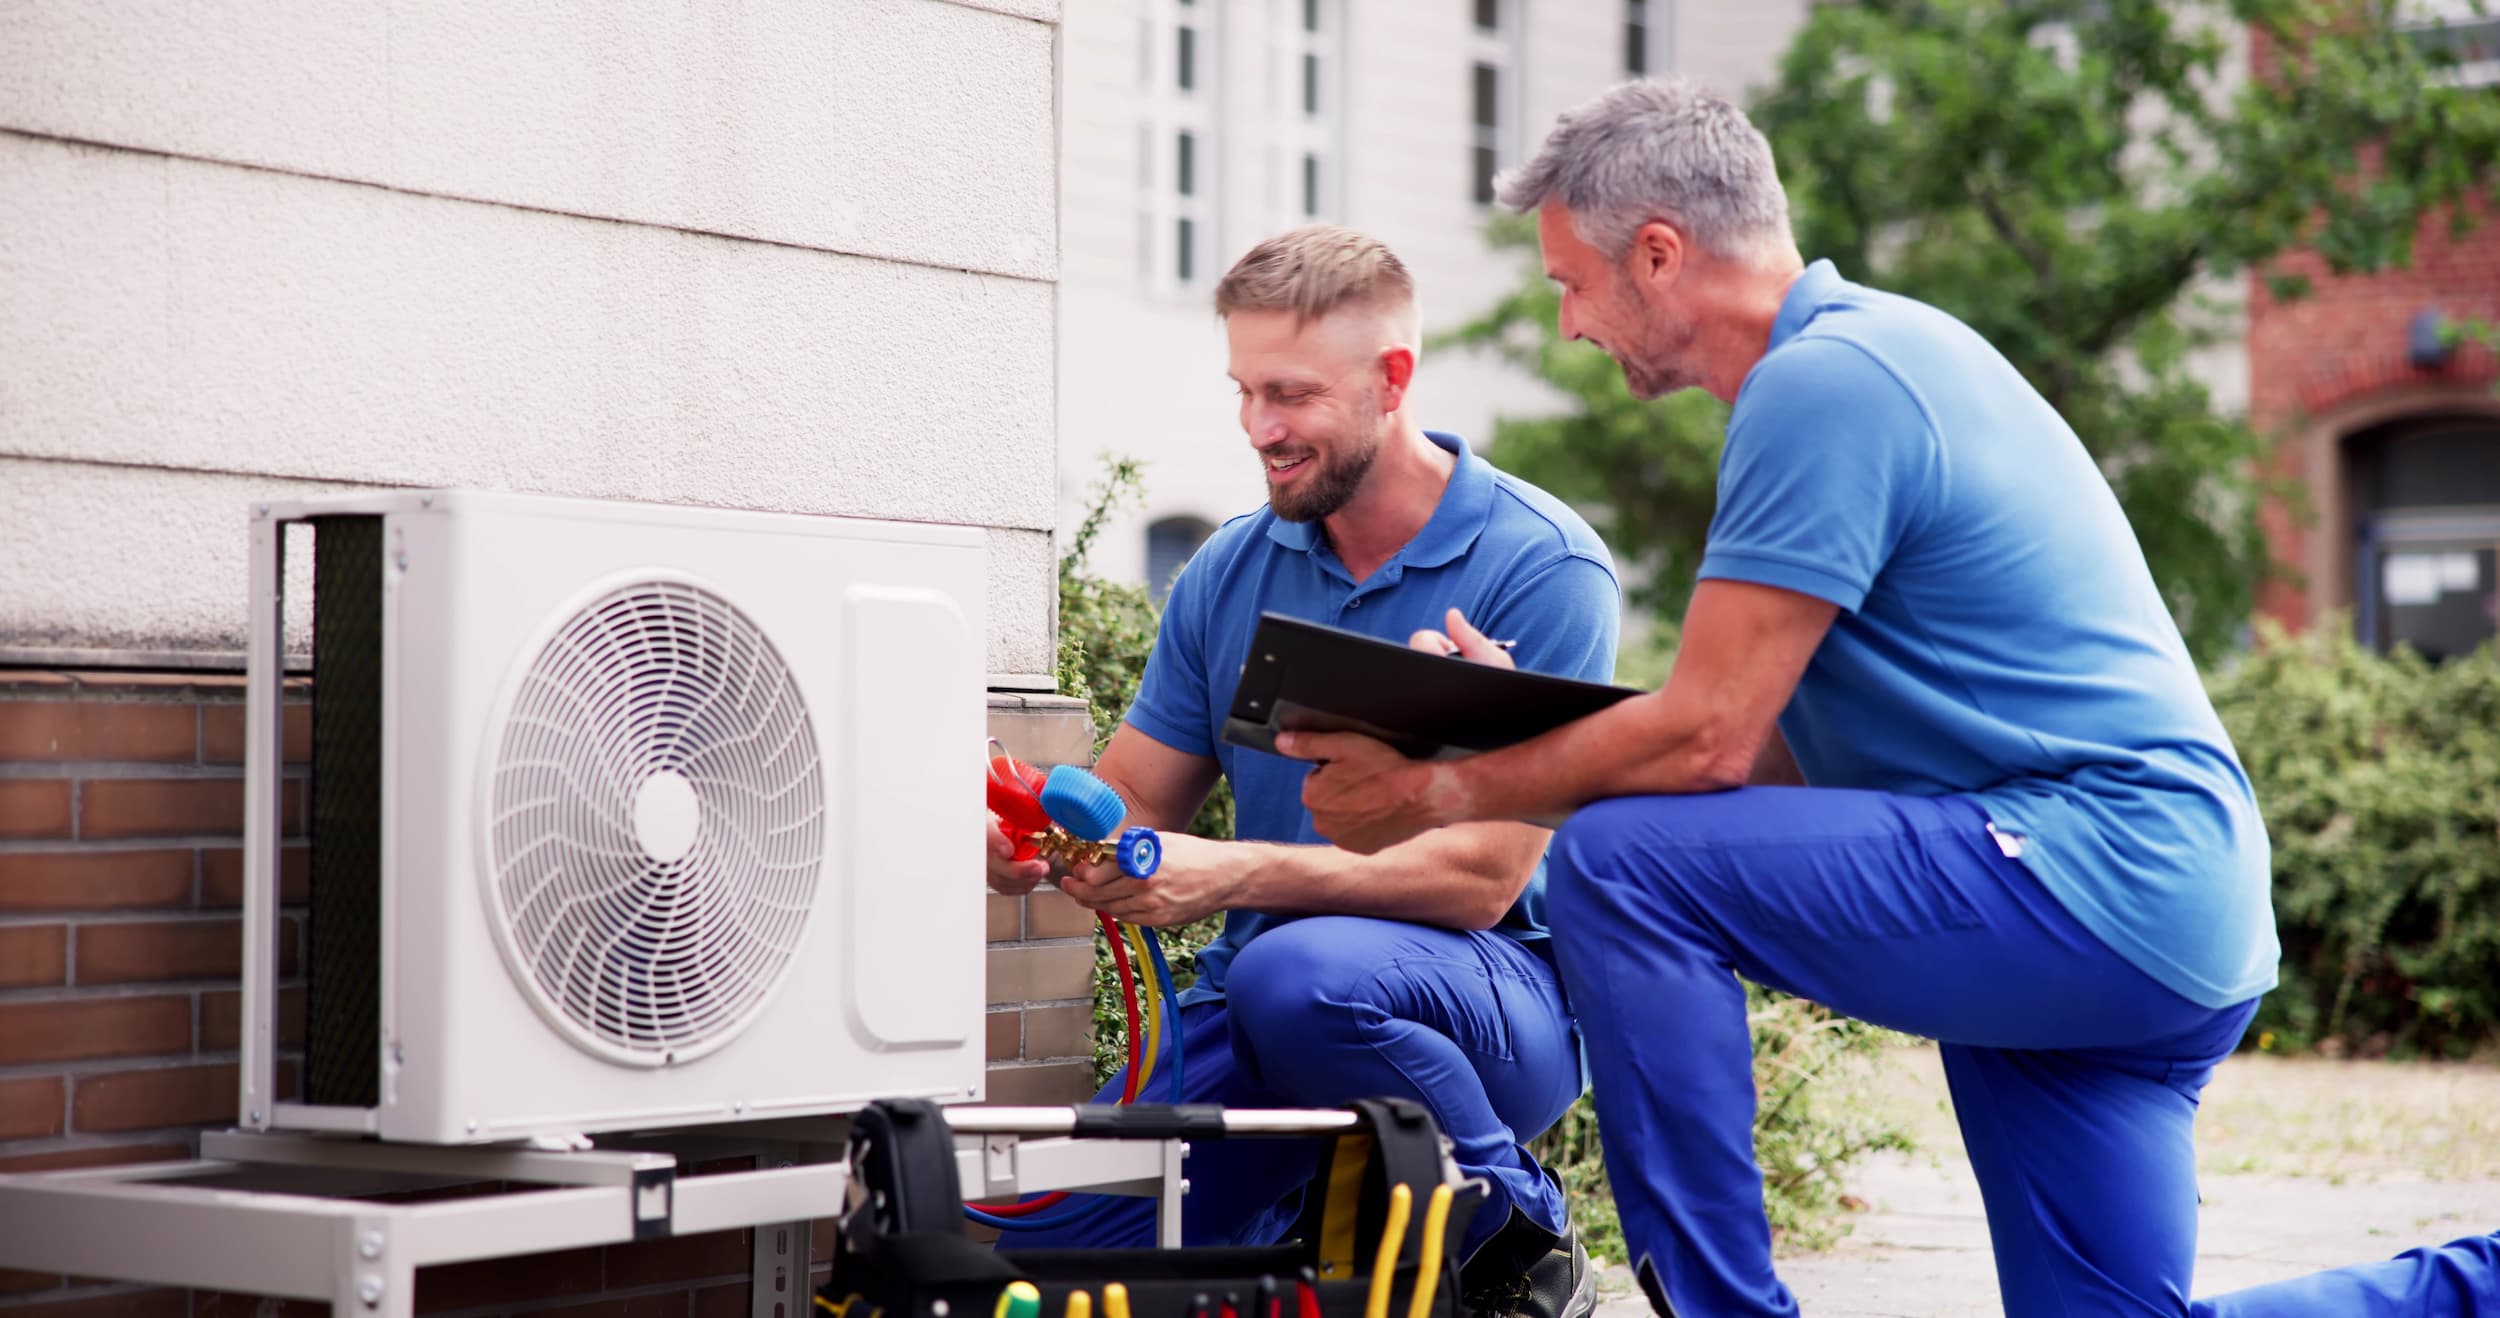 Unlock Year-End Savings on Furnace and Air Conditioning Units with Paul’s Heating and Air Conditioning in Reno, NV